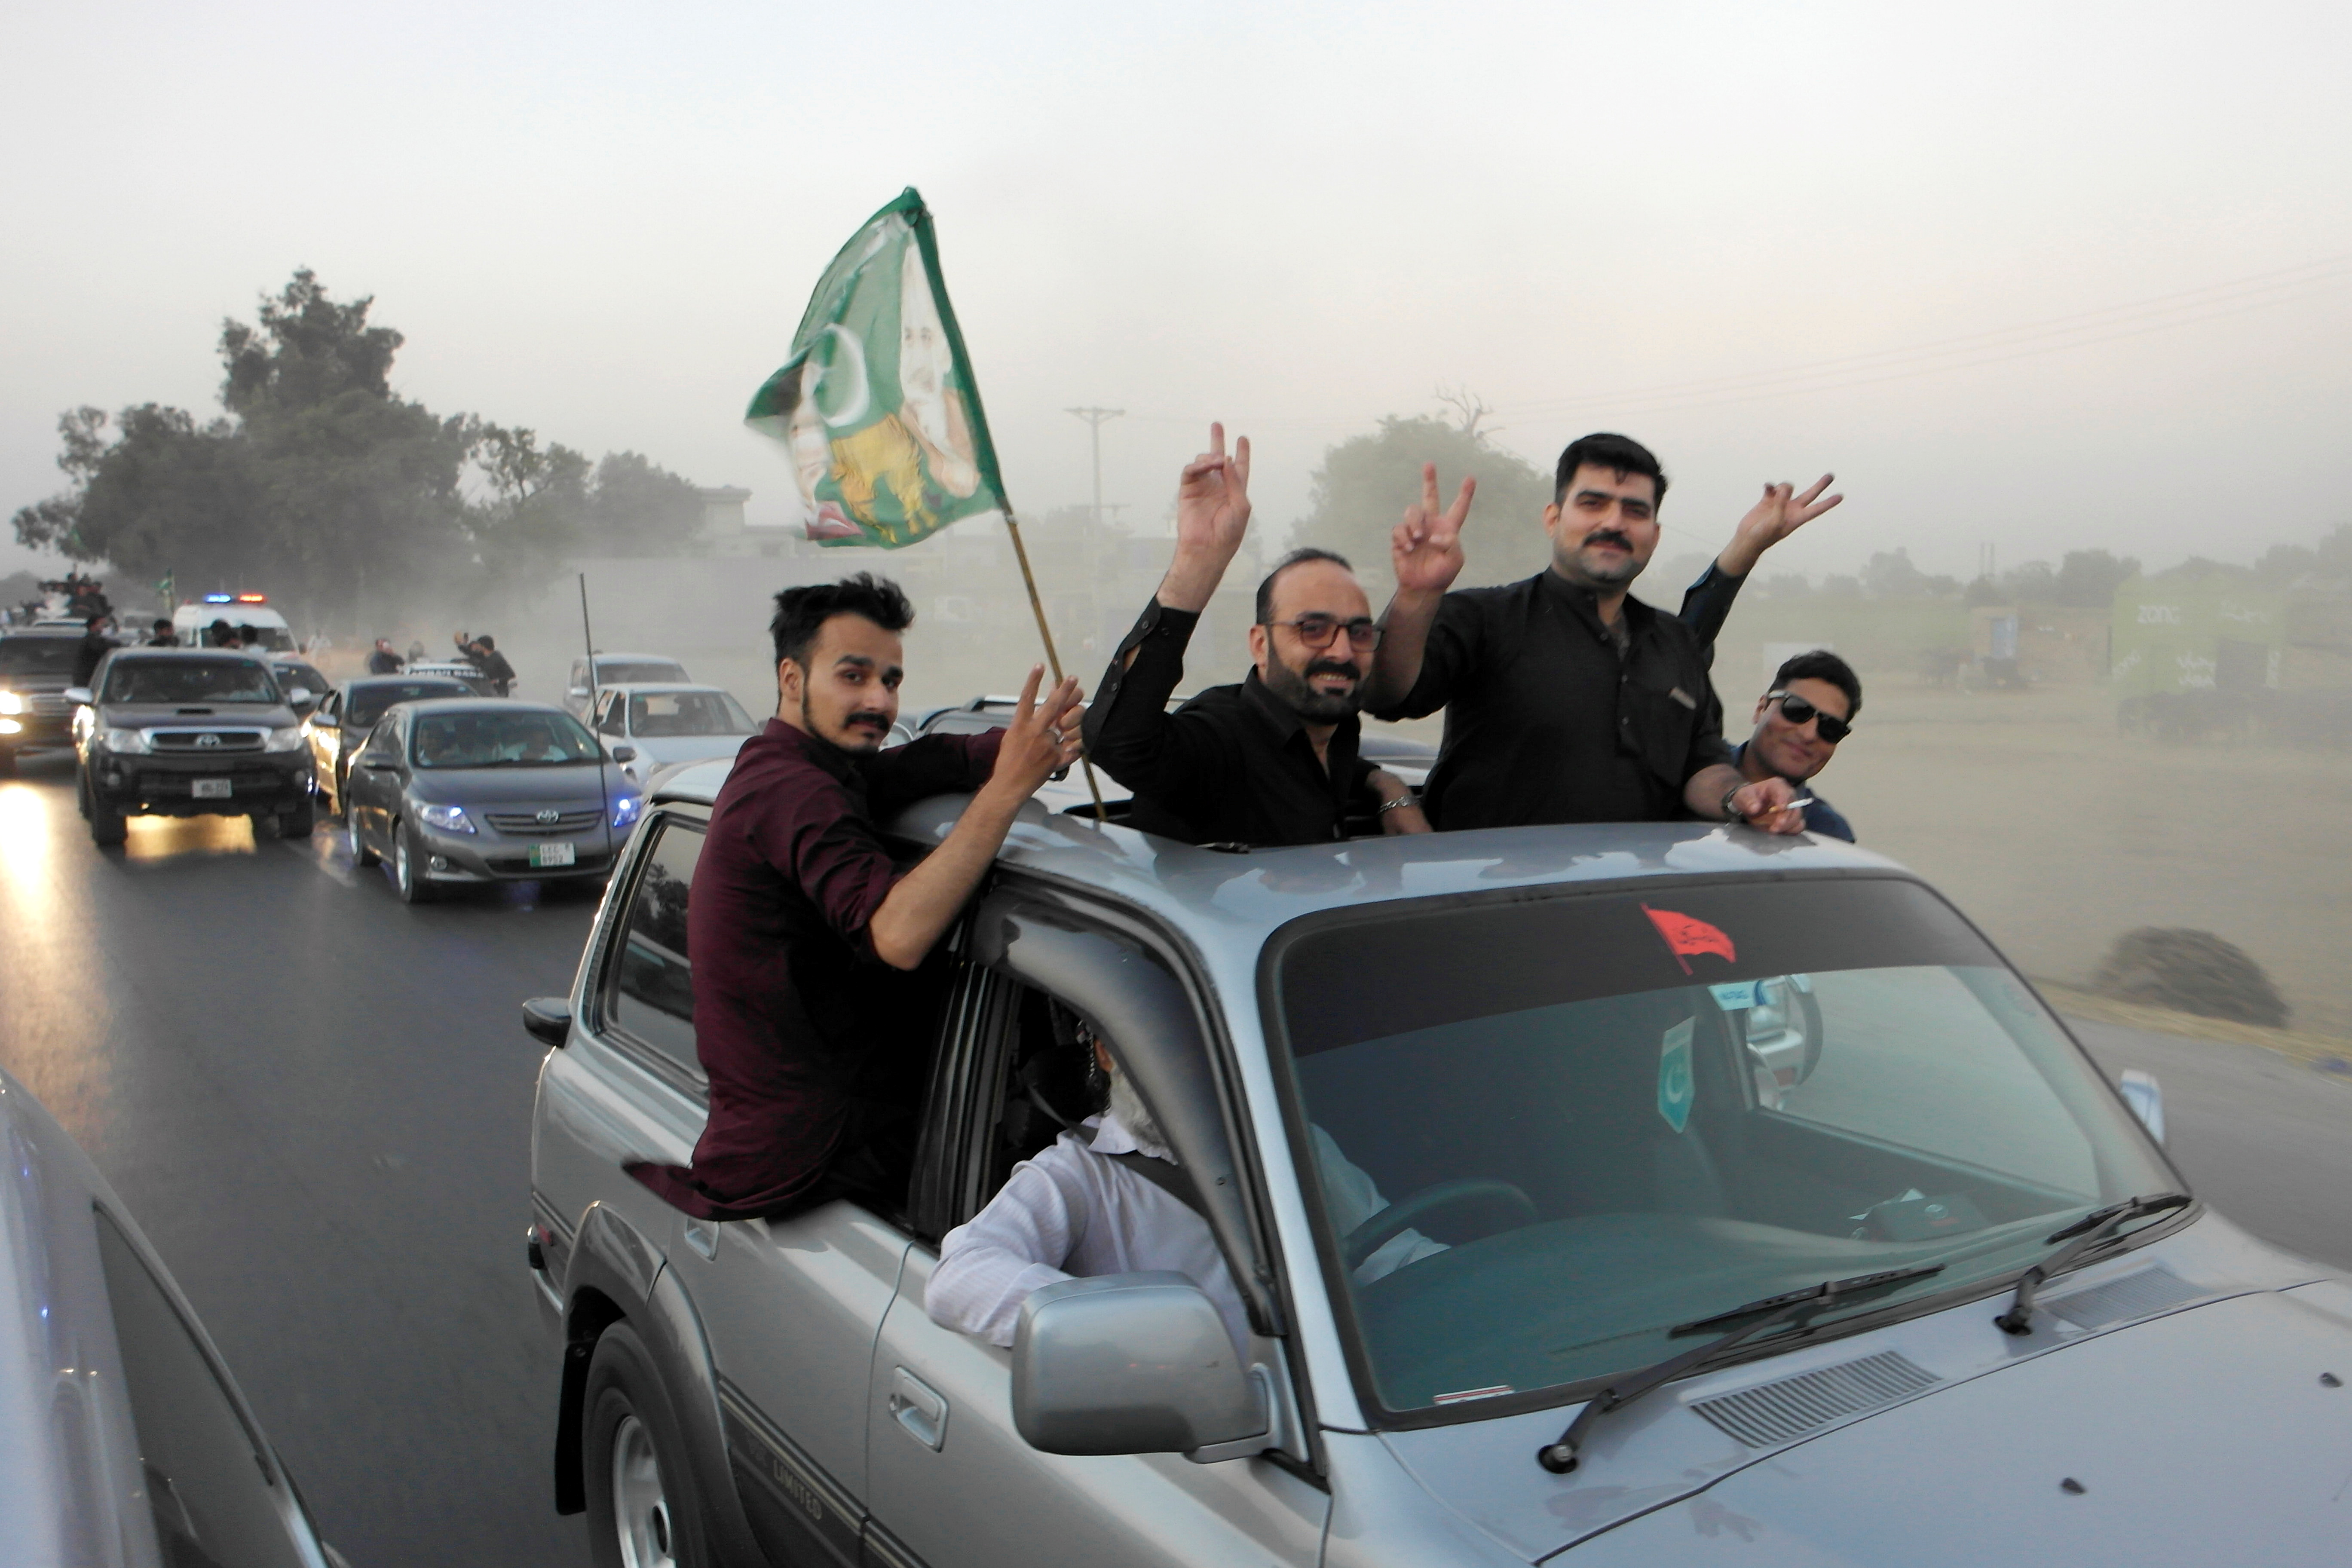 Supporters of Pakistan Democratic Movement (PDM), an alliance of political opposition parties, gesture as they head to attend an anti-government protest rally in Gujranwala, Pakistan October 16, 2020. Photo: Reuters